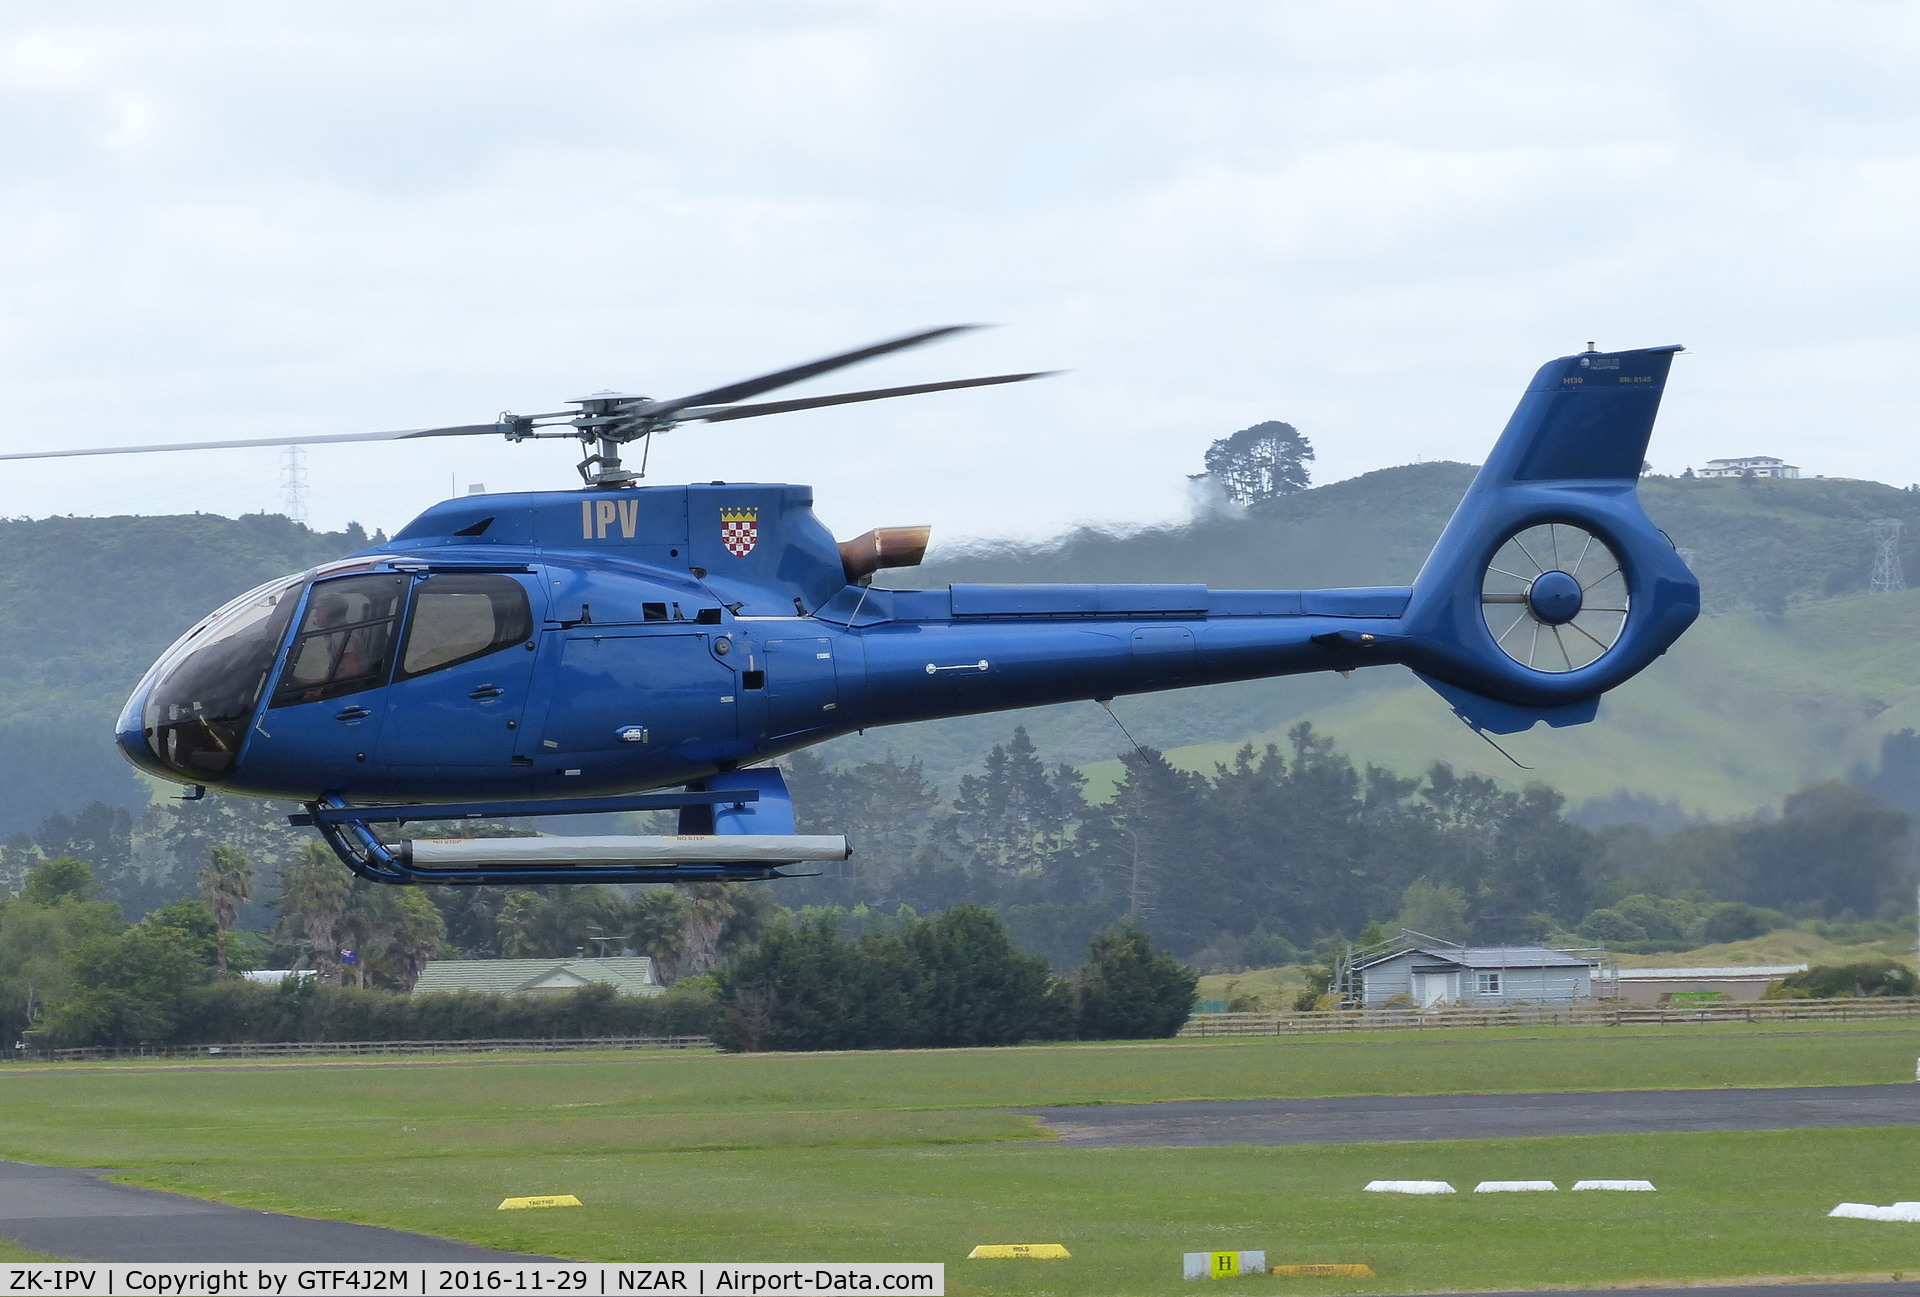 ZK-IPV, 2015 Airbus Helicopters EC-130T-2 C/N 8145, ZK-IPV at Ardmore 29.11.16